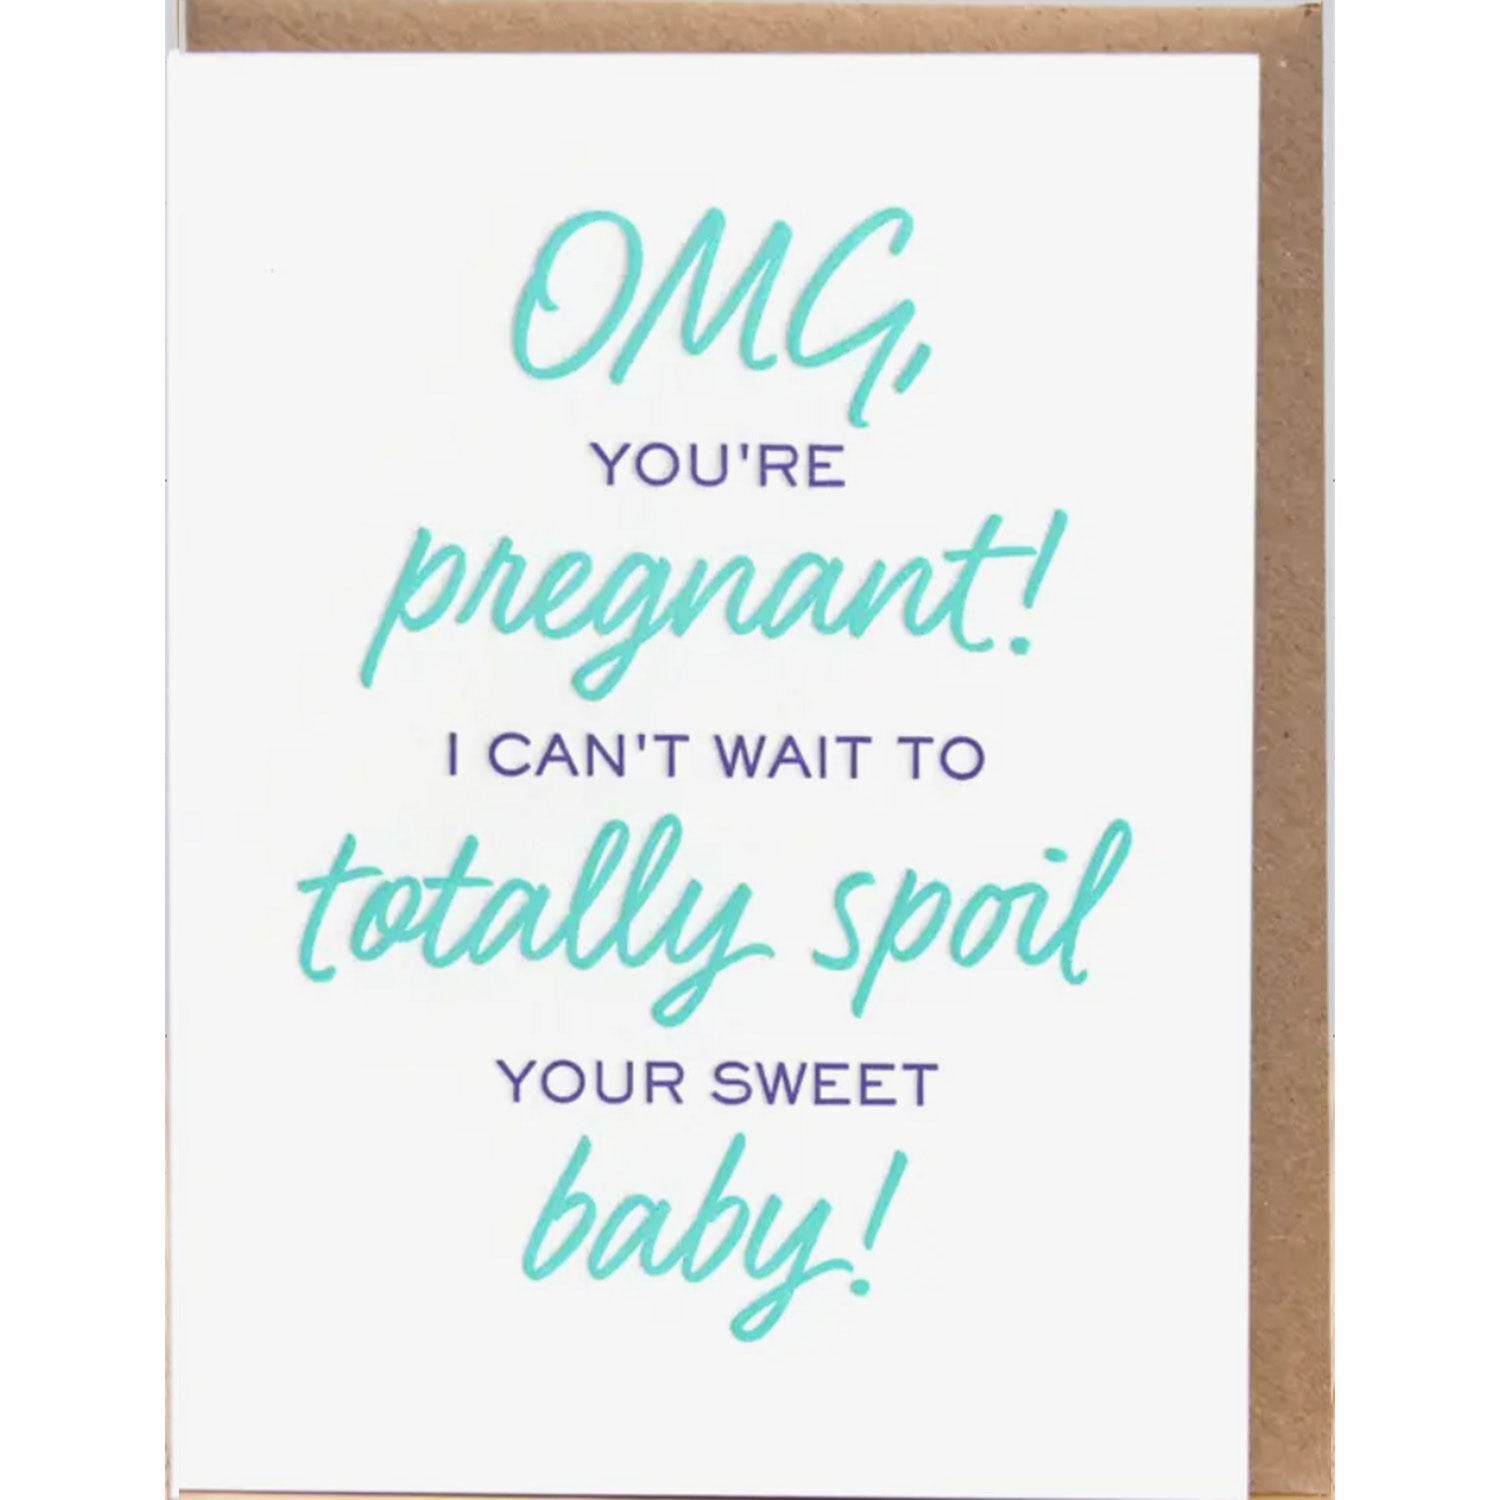 spoil your baby (Letterpress Card)